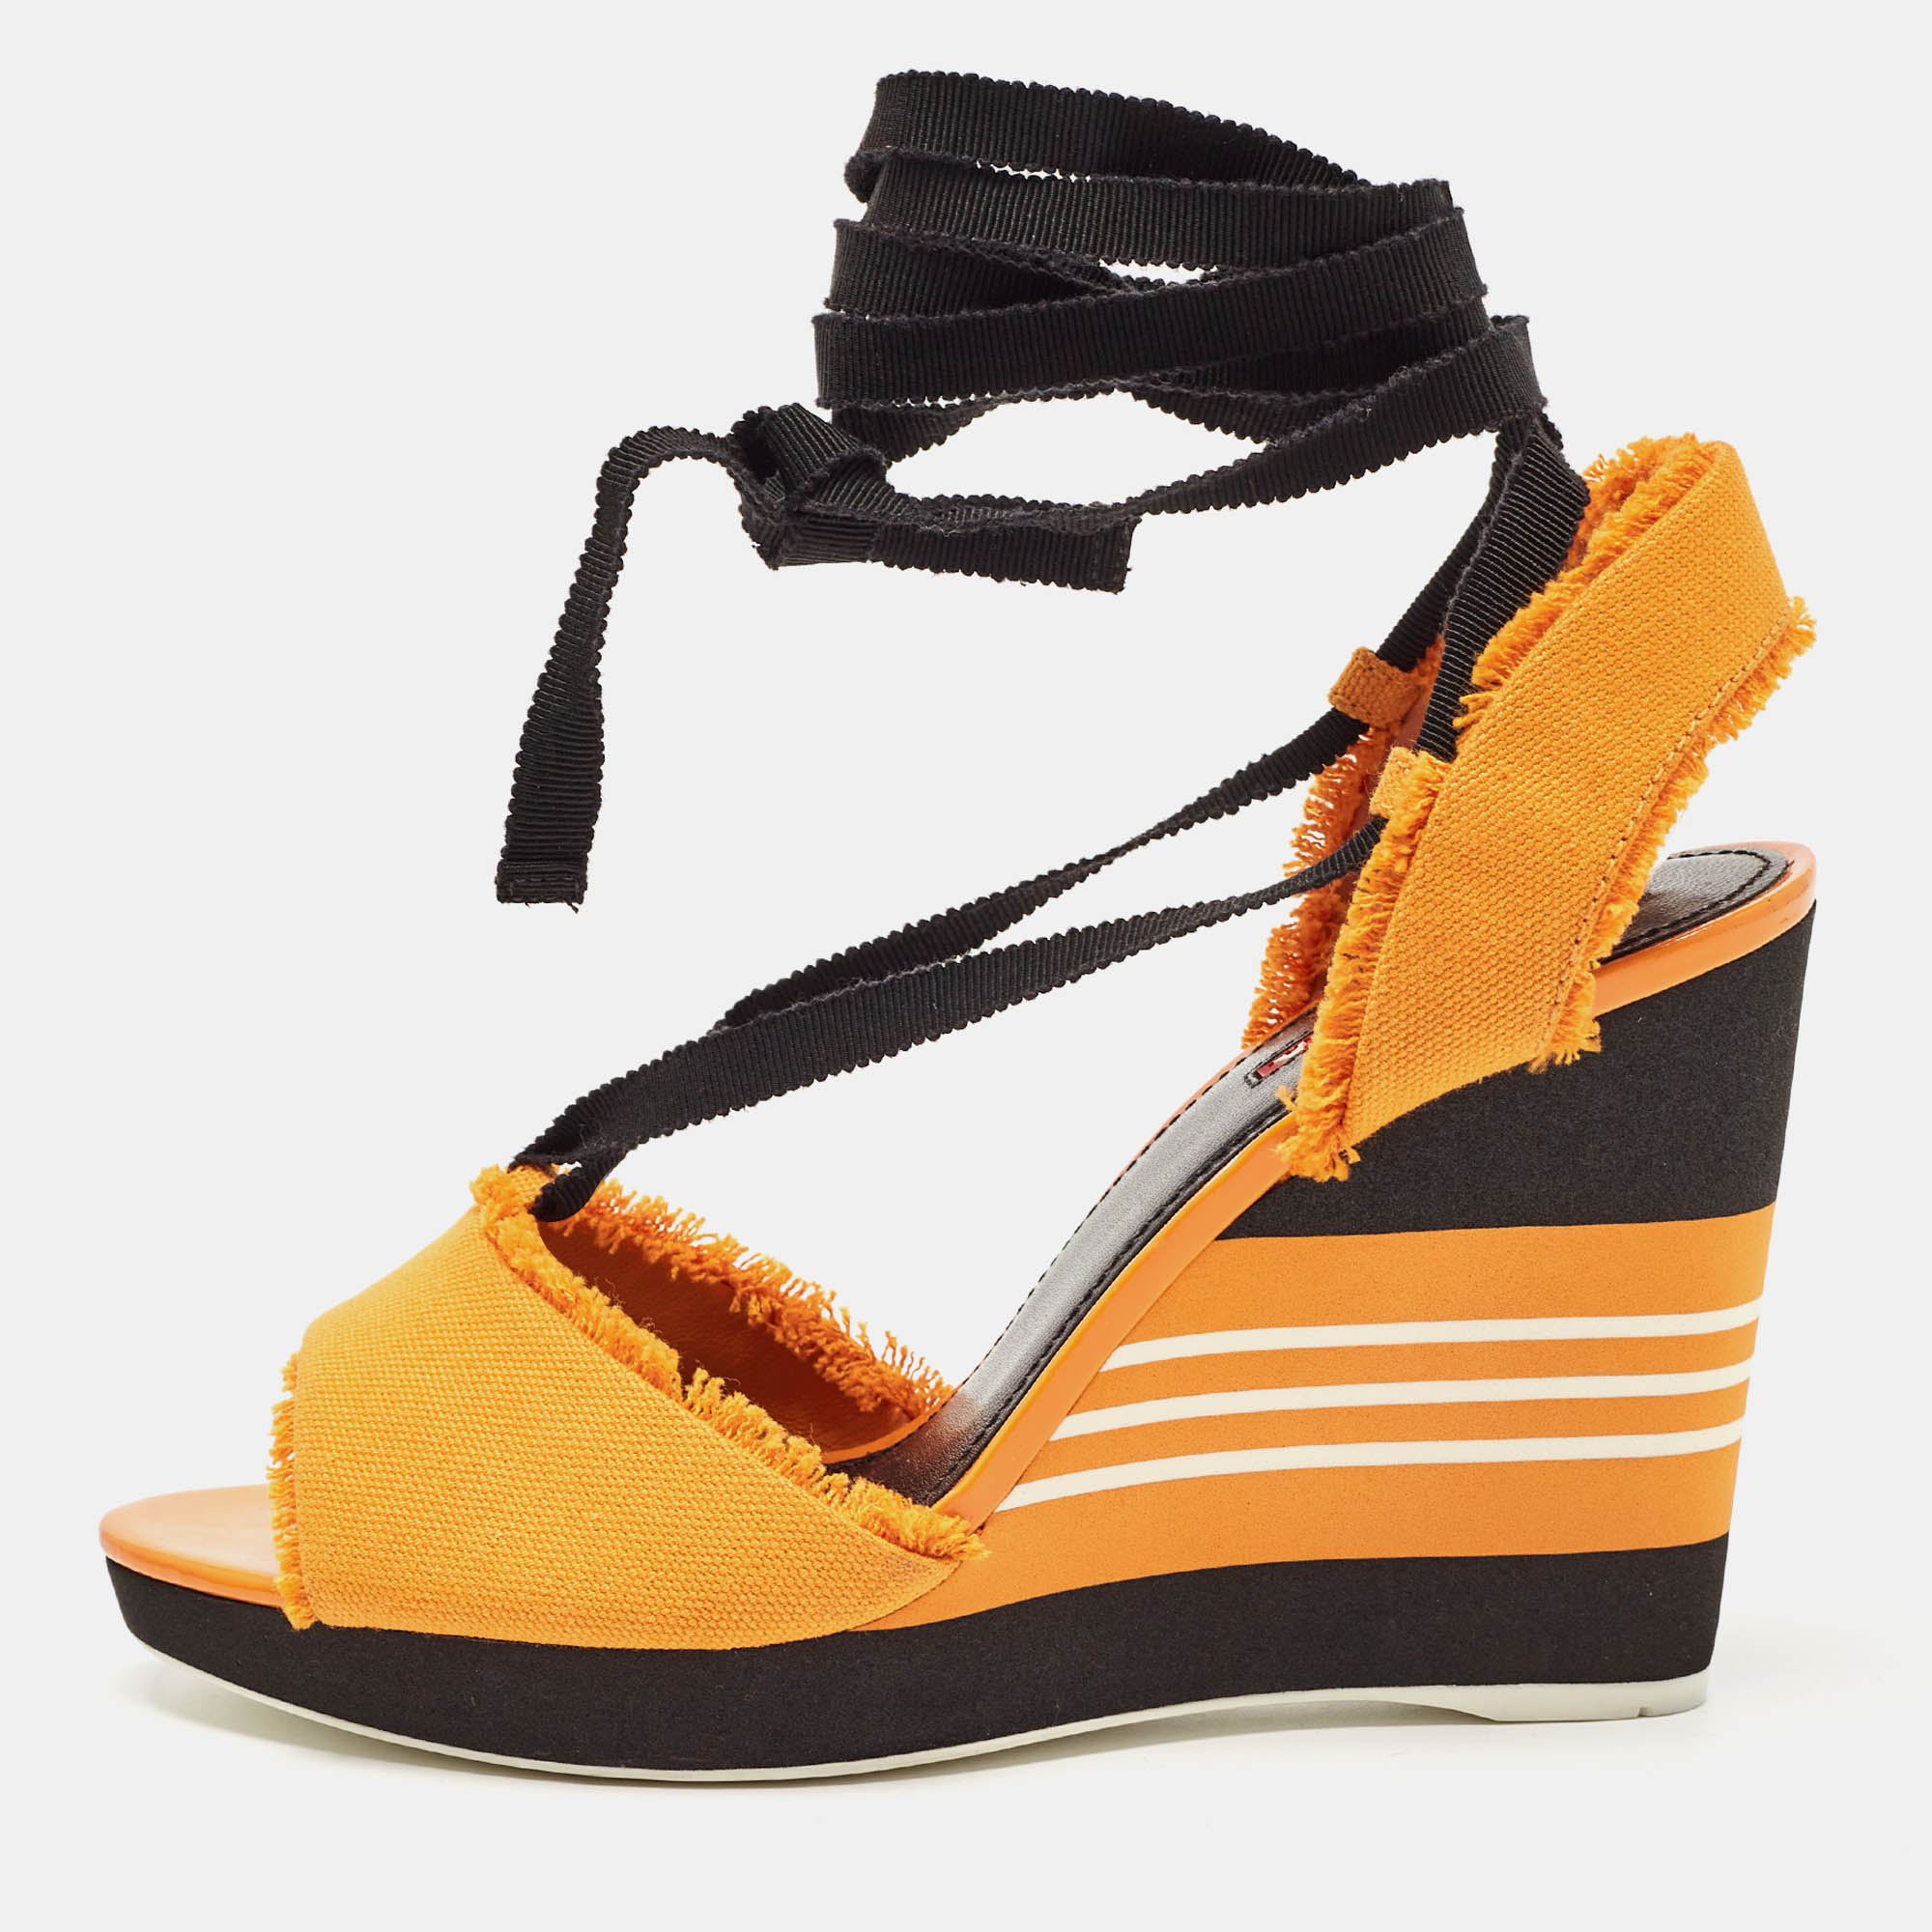 Wear these Prada sandals to spruce up any outfit. They are versatile chic and can be easily styled. Made using quality materials these sandals are well built and long lasting.